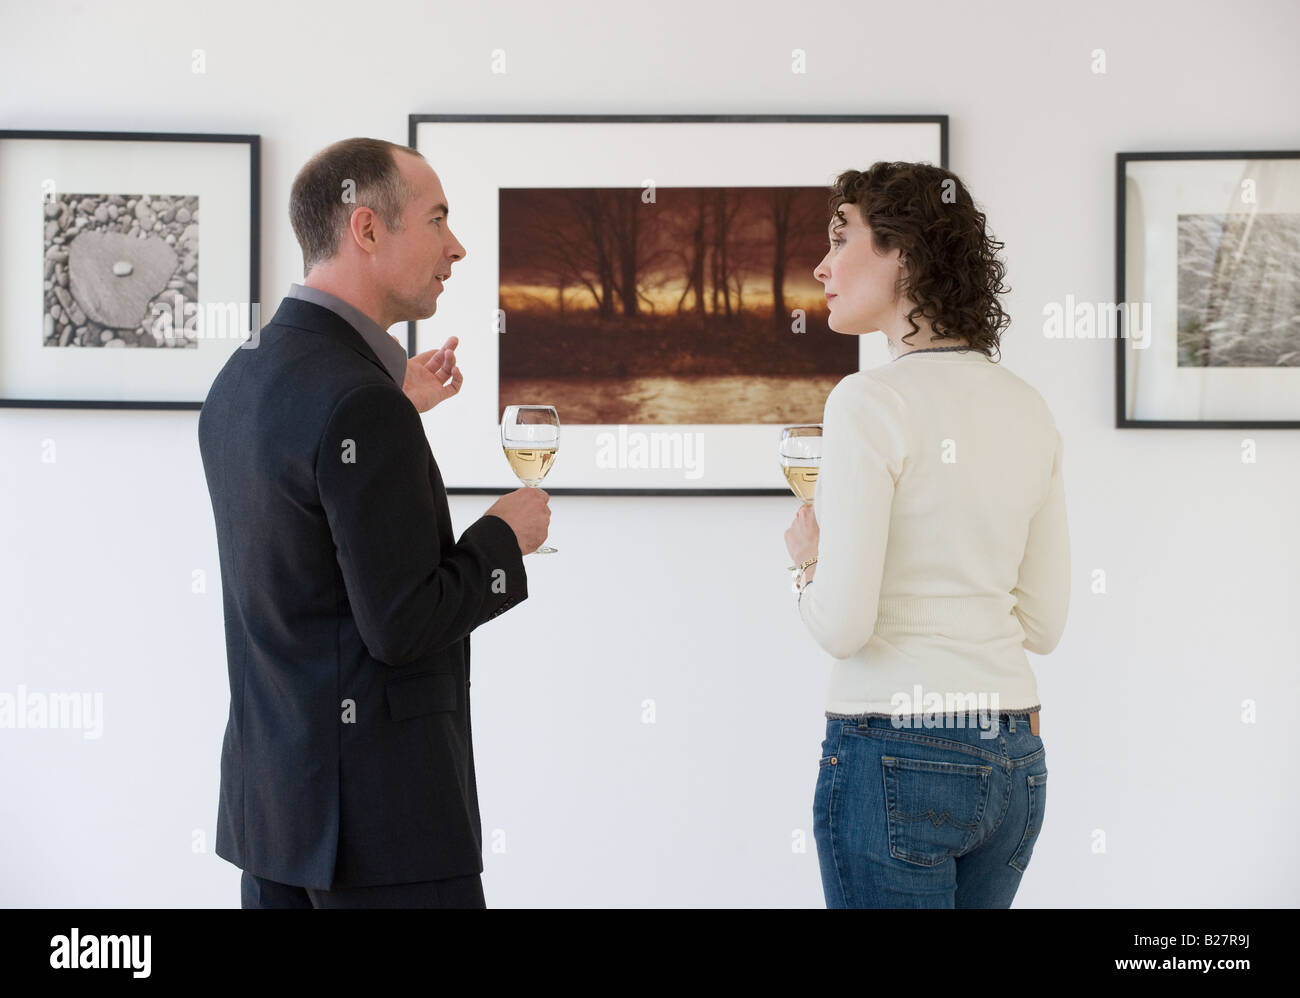 Couple discussing art at art gallery Stock Photo